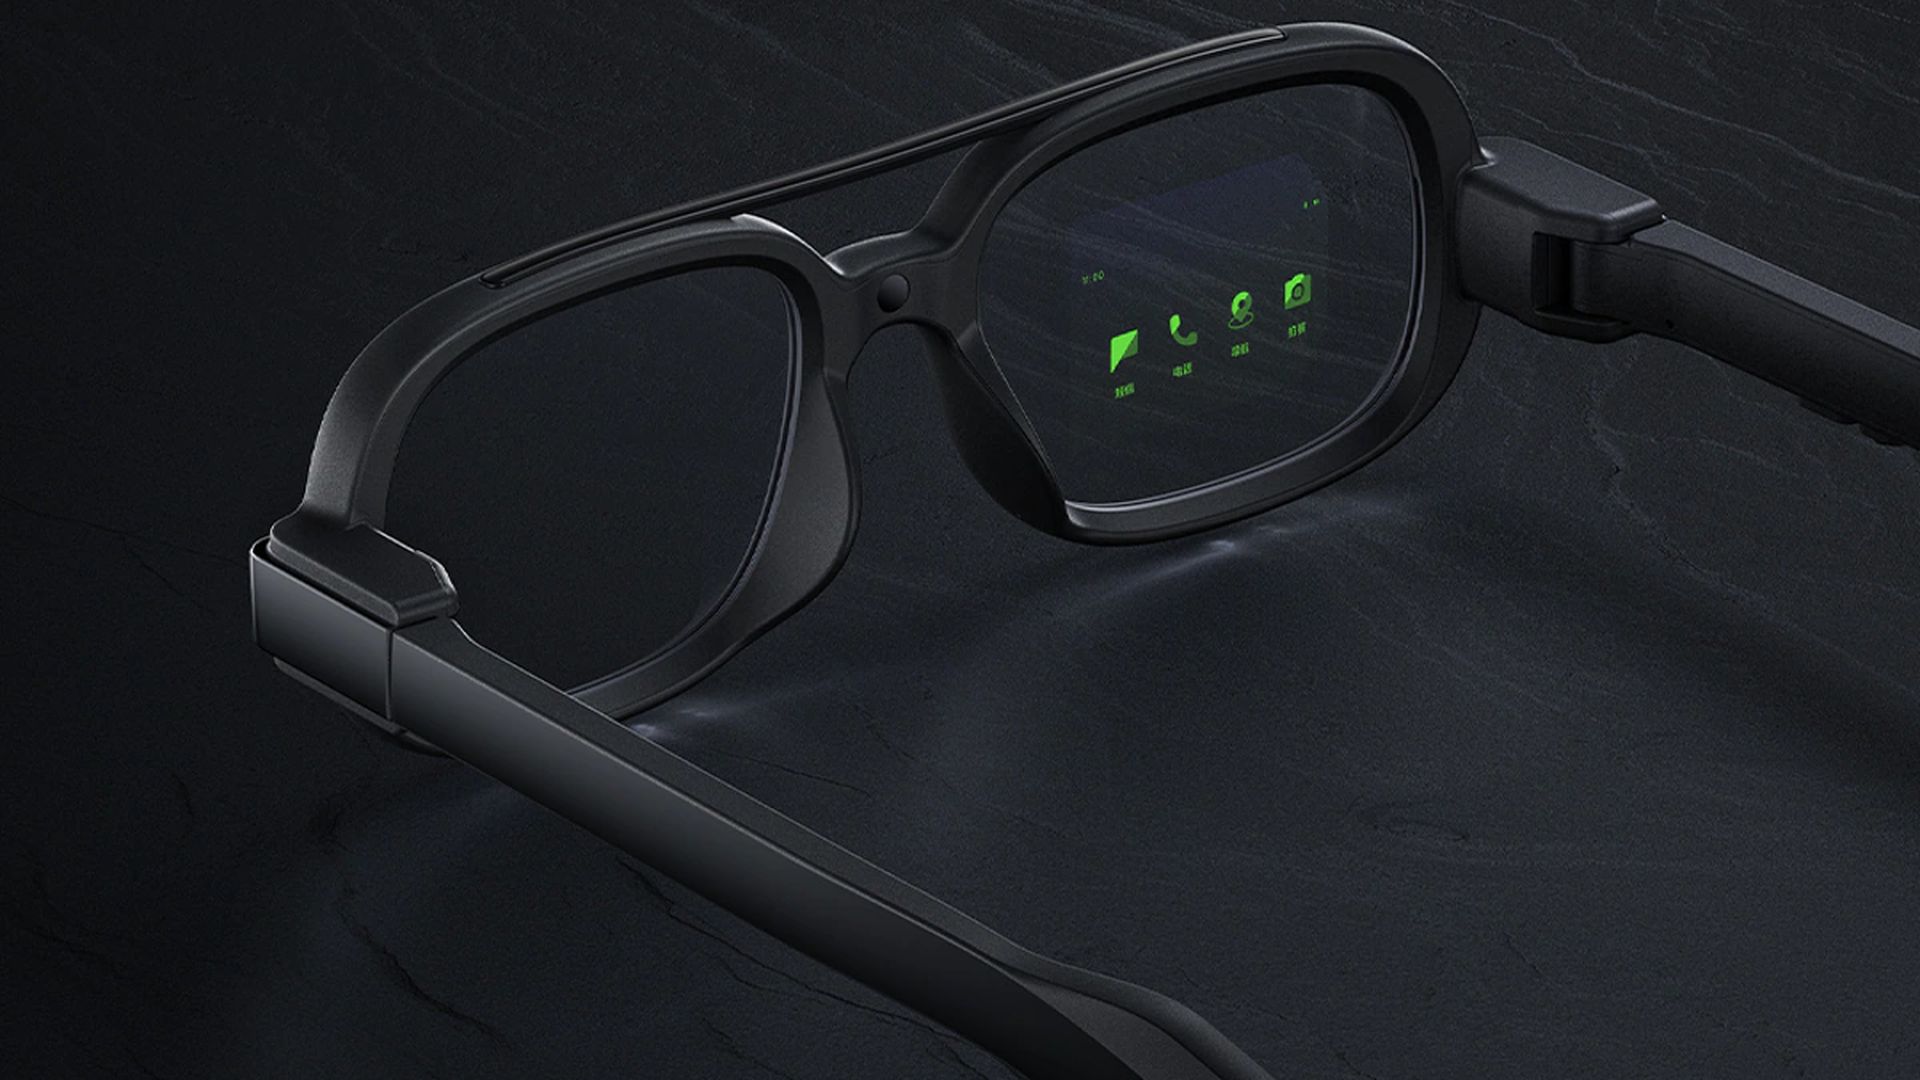 Today, we are going to be covering Xiaomi smart glasses Mijia's specs, price, and release date, so you can decide whether to buy it or not when it comes out.